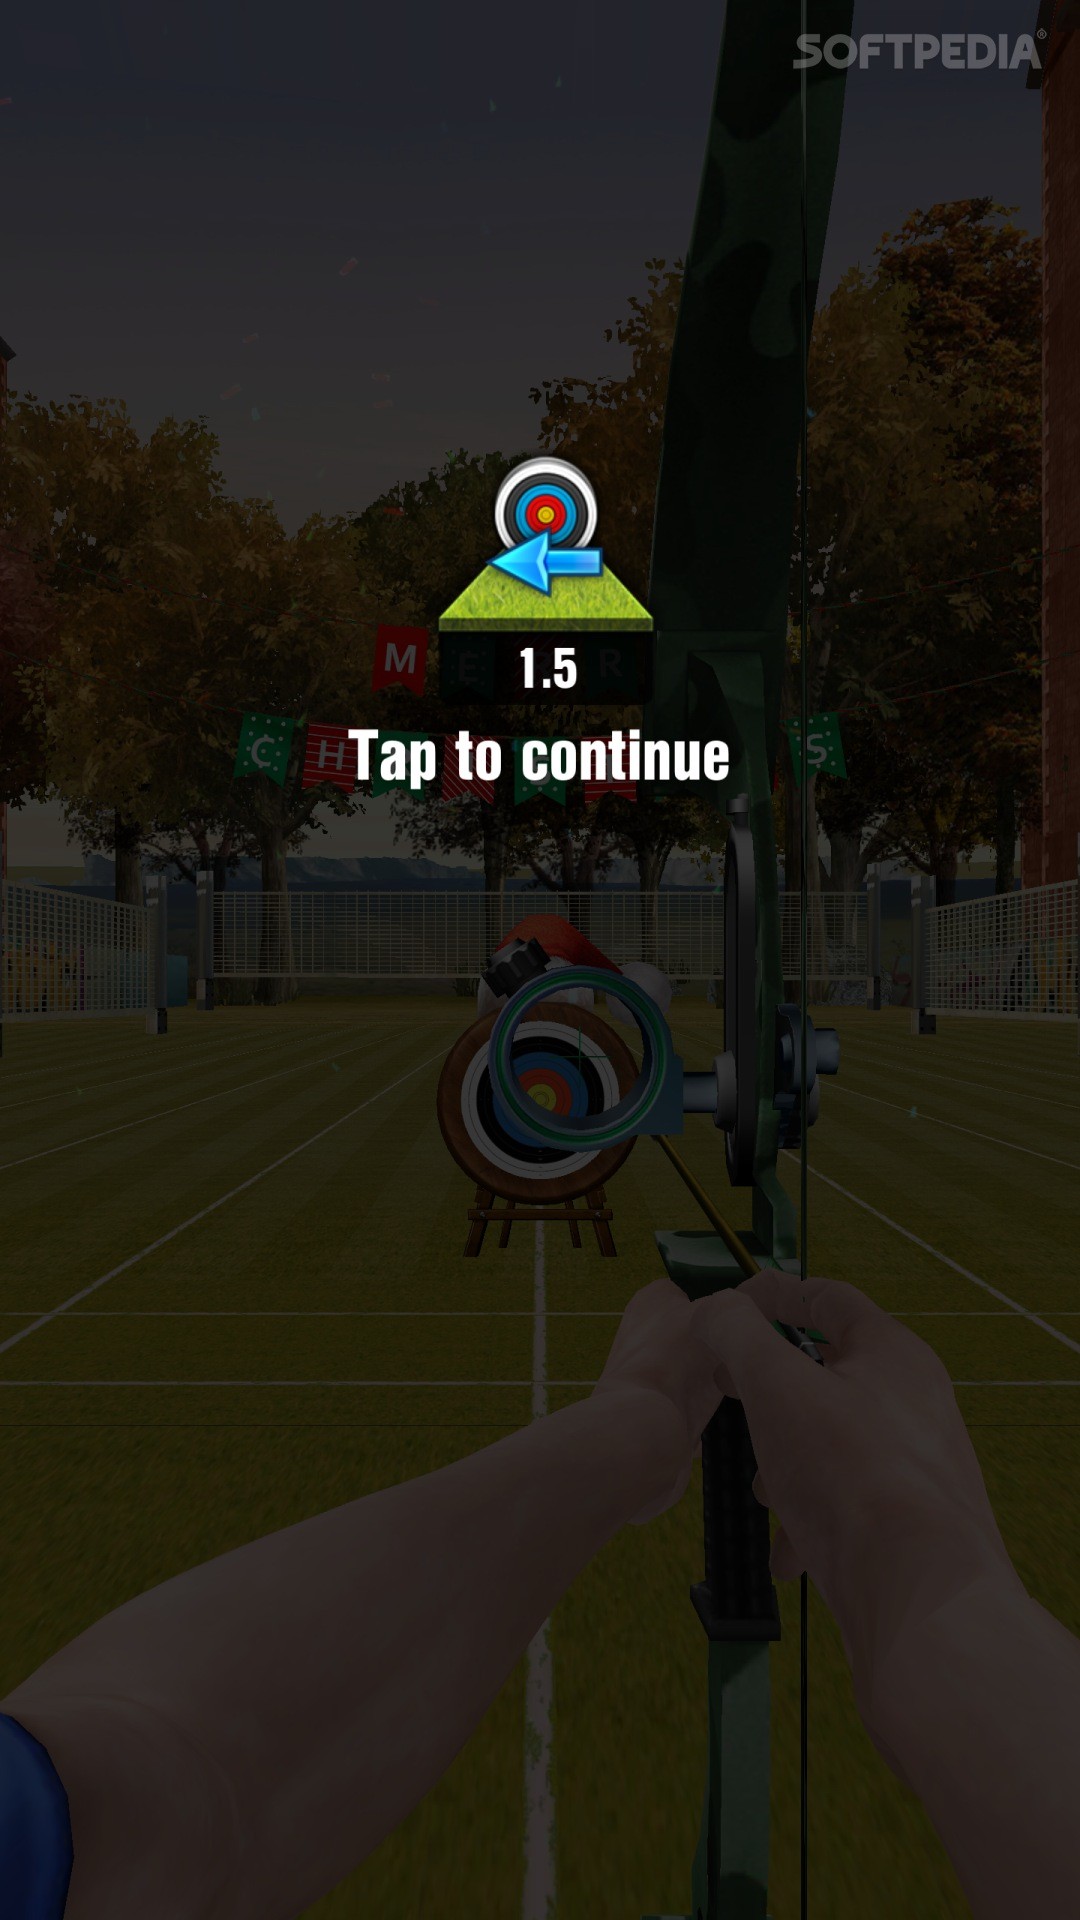 download the last version for ipod Archery King - CTL MStore